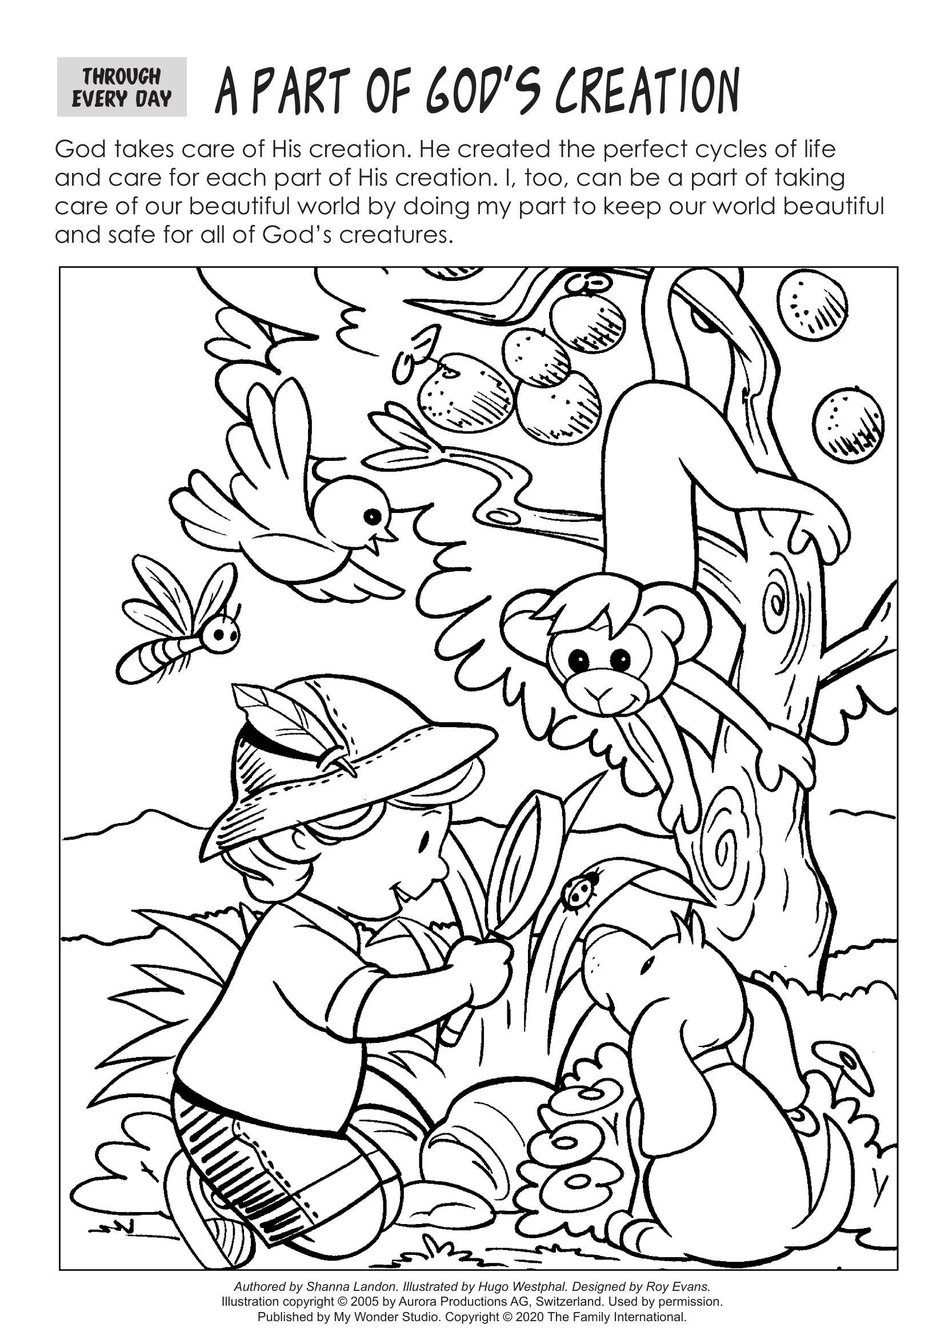 Coloring Page: Through Every Day: A Part of God's Creation | My Wonder  Studio